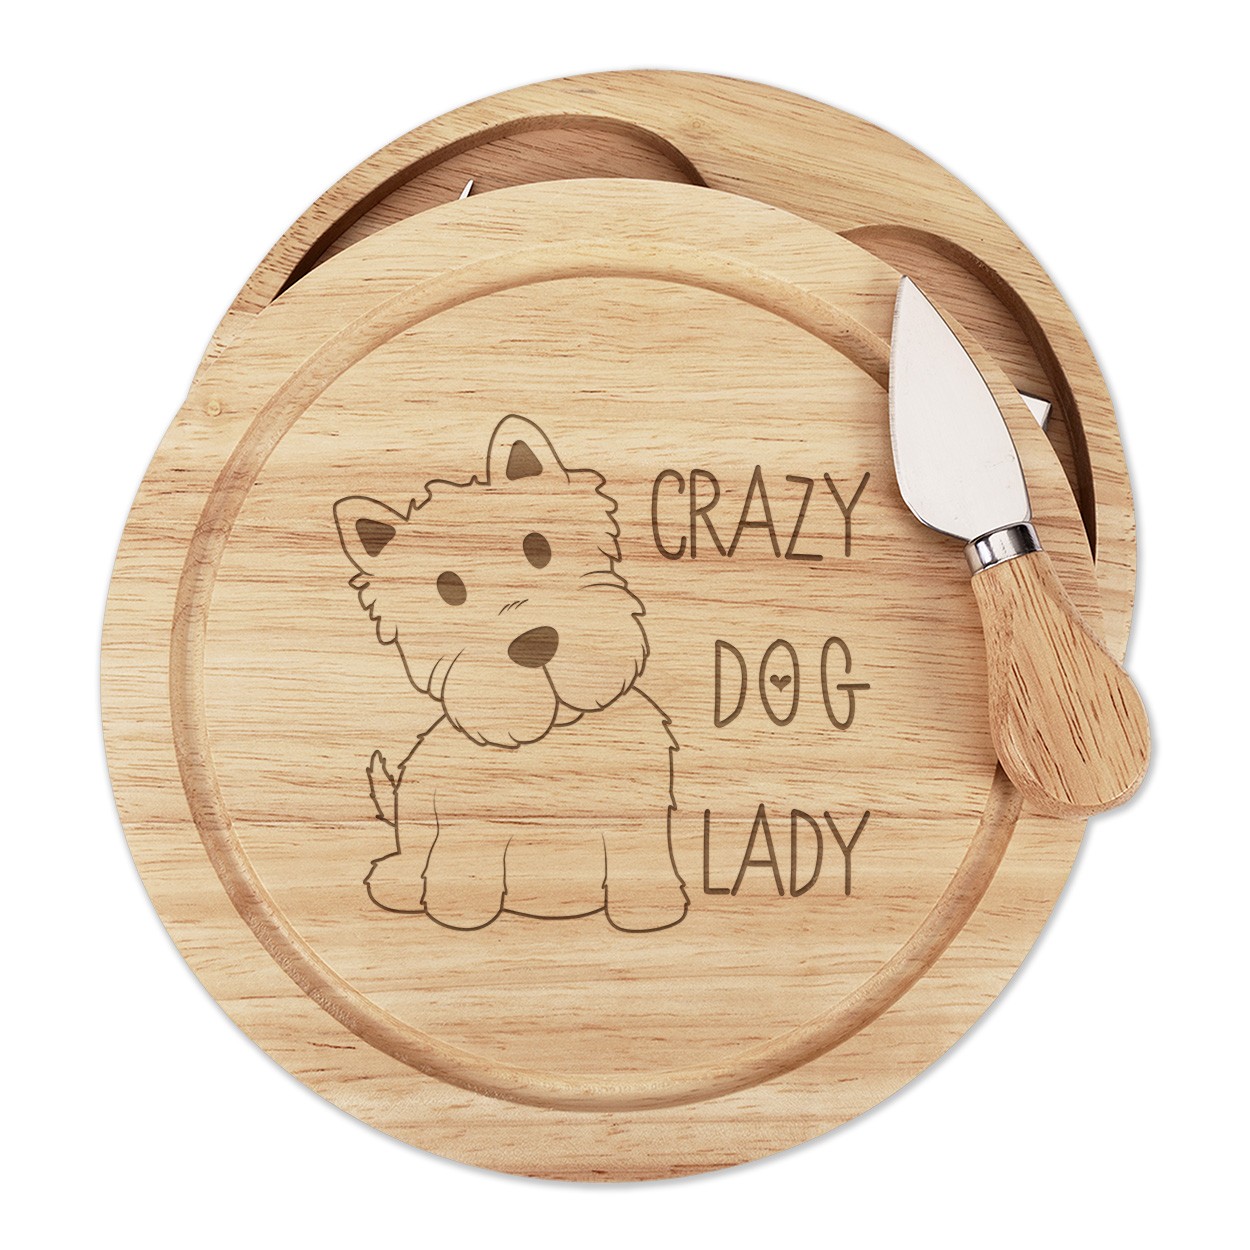 Crazy Dog Lady Wooden Cheese Board Set 4 Knives